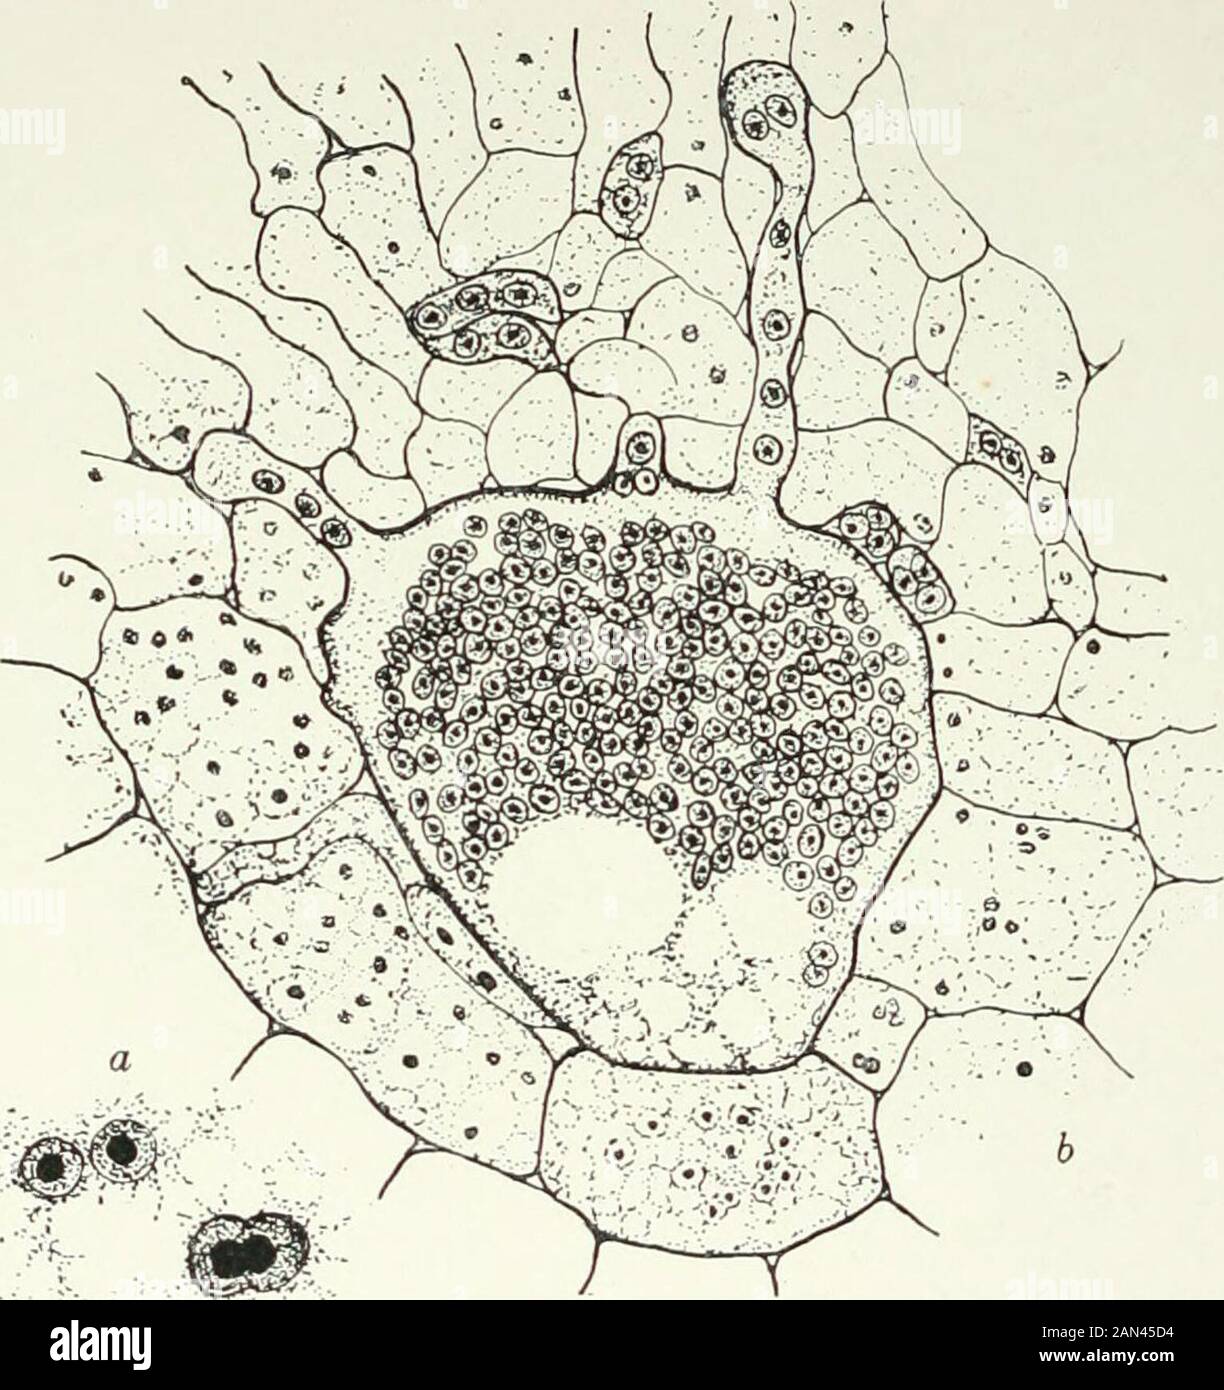 Fungi, Ascomycetes, Ustilaginales, Uredinales . Fig. 67. Humariagranulata Quel.; young archicarp, X320; after Blackmail ami Fraser. The ascogenous hyphae contain many nuclei irregularly arranged. Asciin- formed in the usual way; their nuclei show about eight chromosomesin the first division. Owing to the small size of the nuclei further cytologicaldetails have not been studied in this species. 112 DISCOMYCETES [ch. Humariagranulata is a common red or orange coprophilous form. Thearchicarp develops as a side branch from an ordinary hypha. The apicalcell of this branch increases in size and beco Stock Photo